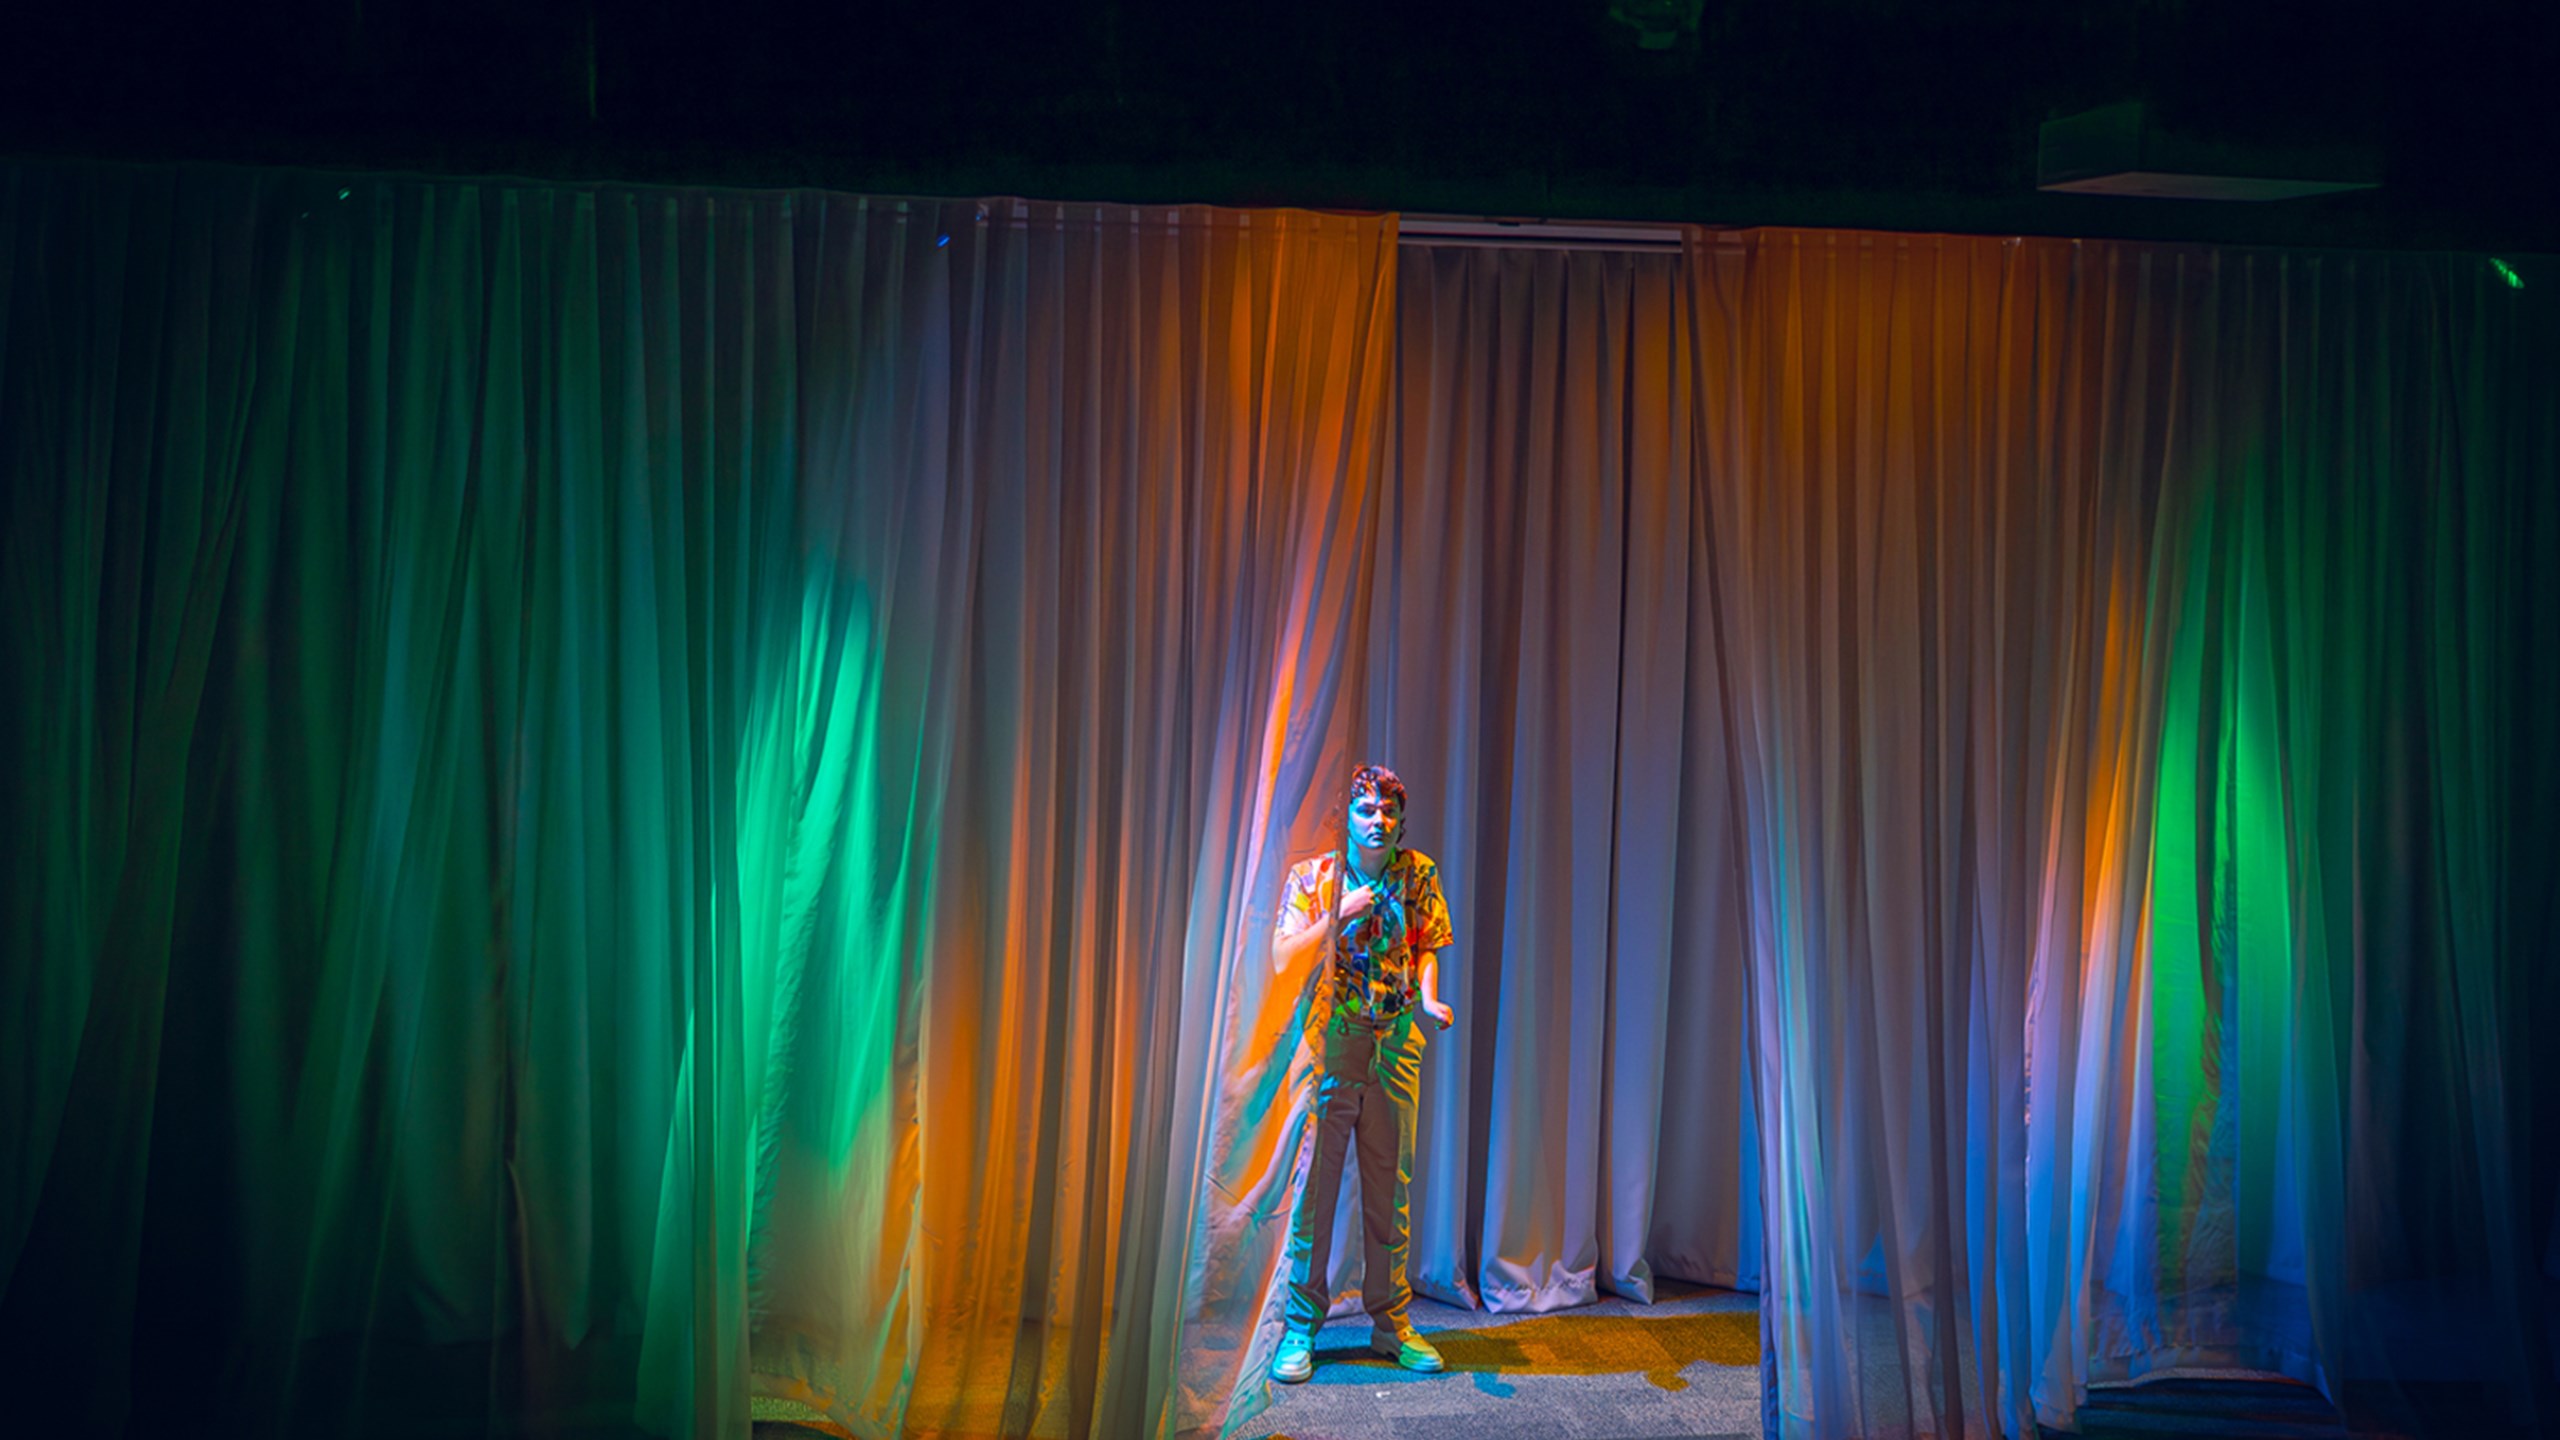 William Rees on stage surrounded by curtains which have orange, blue, and green lights projected on them